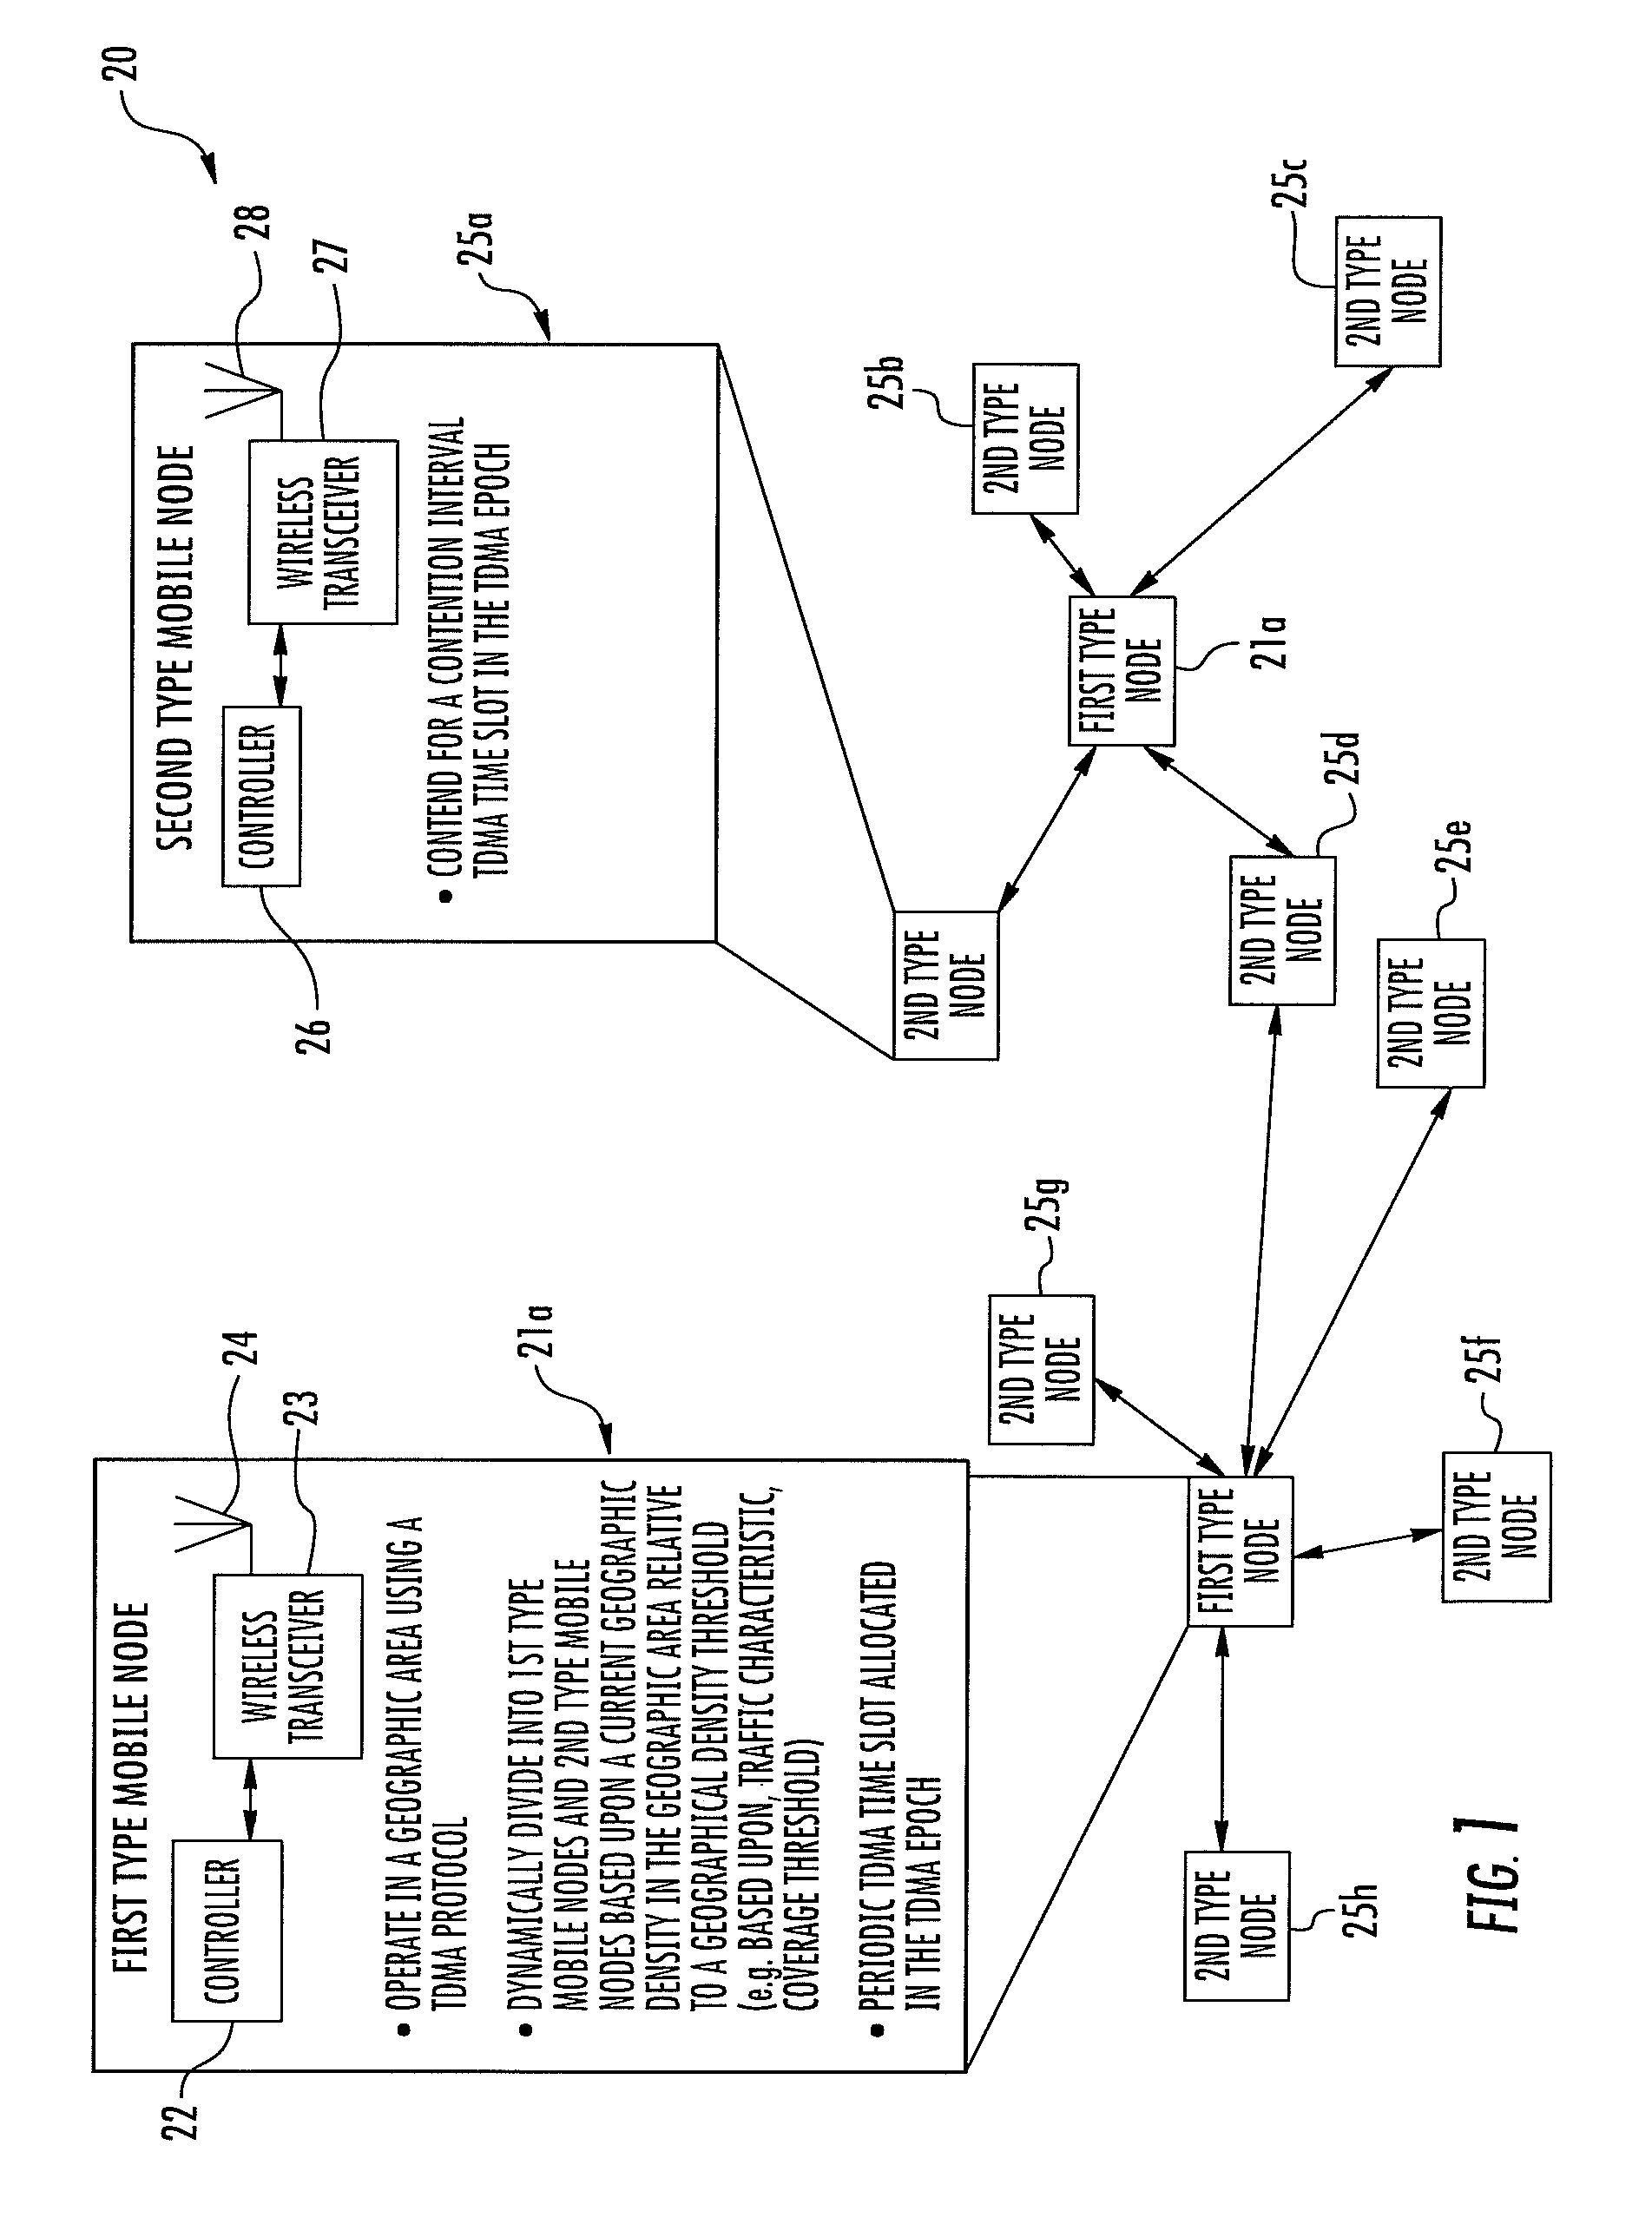 Mobile ad hoc network with dynamic TDMA slot assignments and related methods